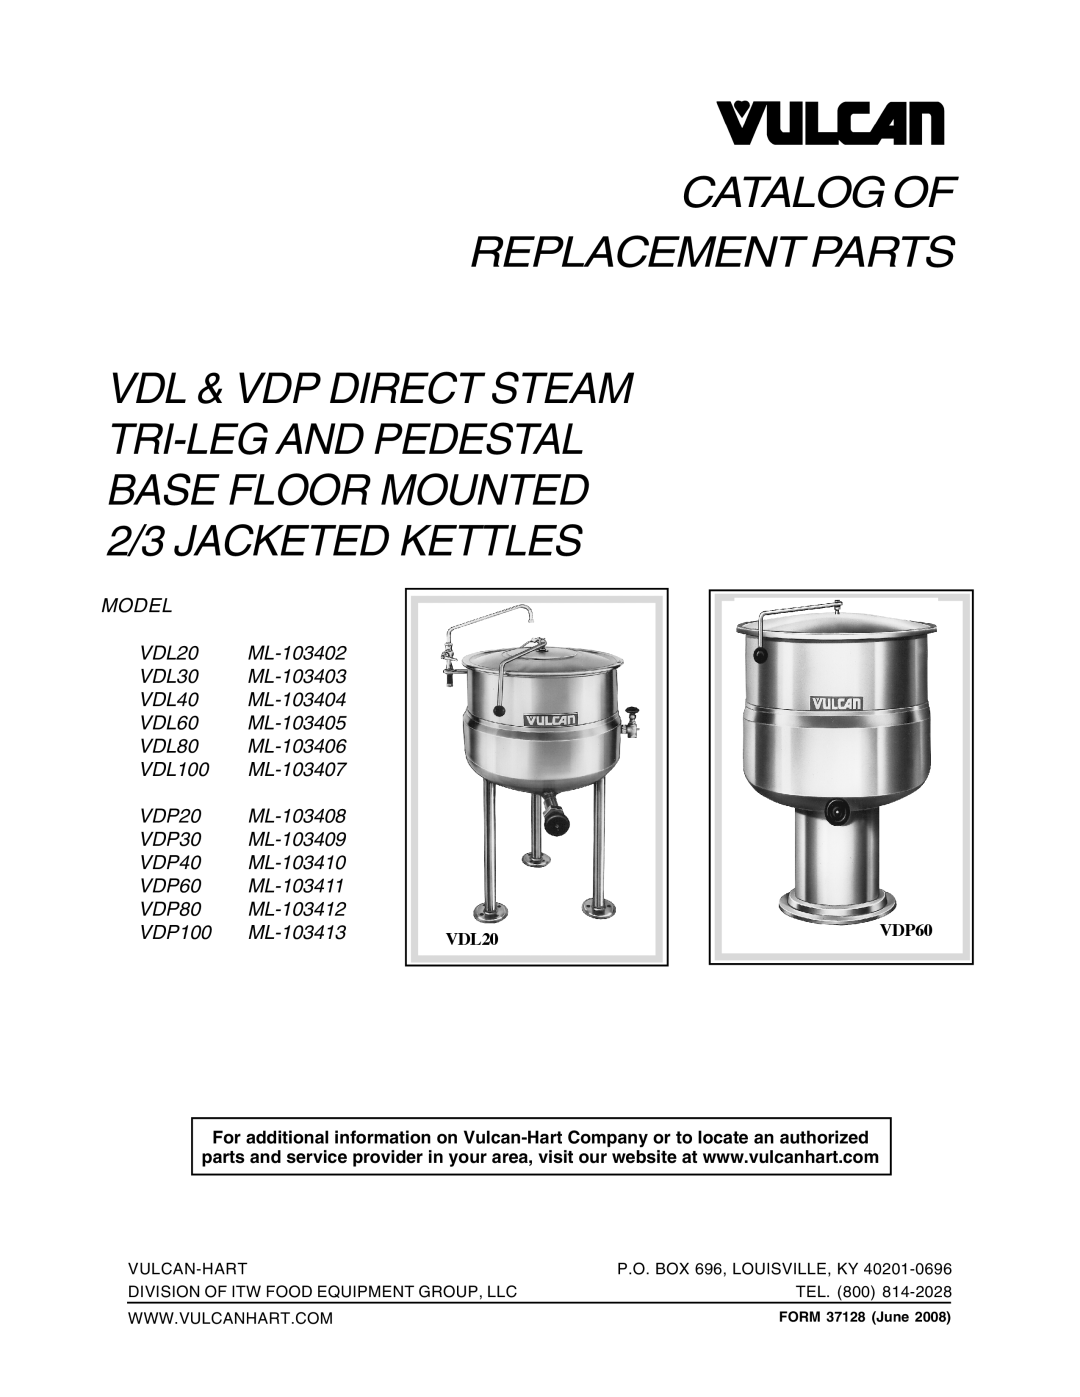 Vulcan-Hart VDP40, VDL20, VDP60, VDP20, VDP80, VDL100, VDL60, VDL30, VDP30, VDP100, VDL40, VDL80 manual Catalog Of Replacement Parts 